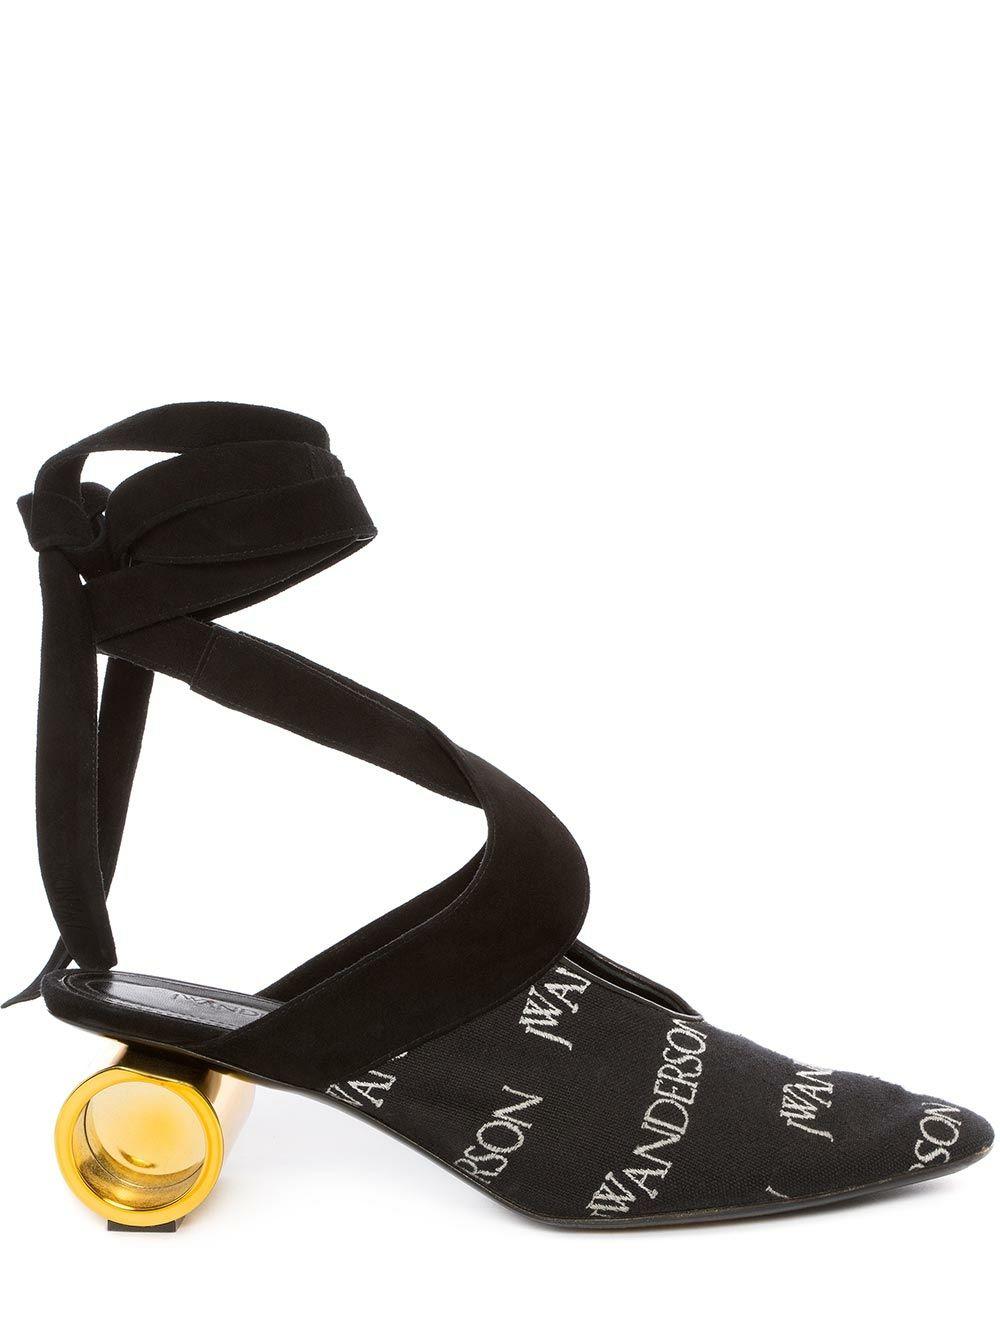 JW Anderson Canvas Logo Ballet Shoes in Black Lyst